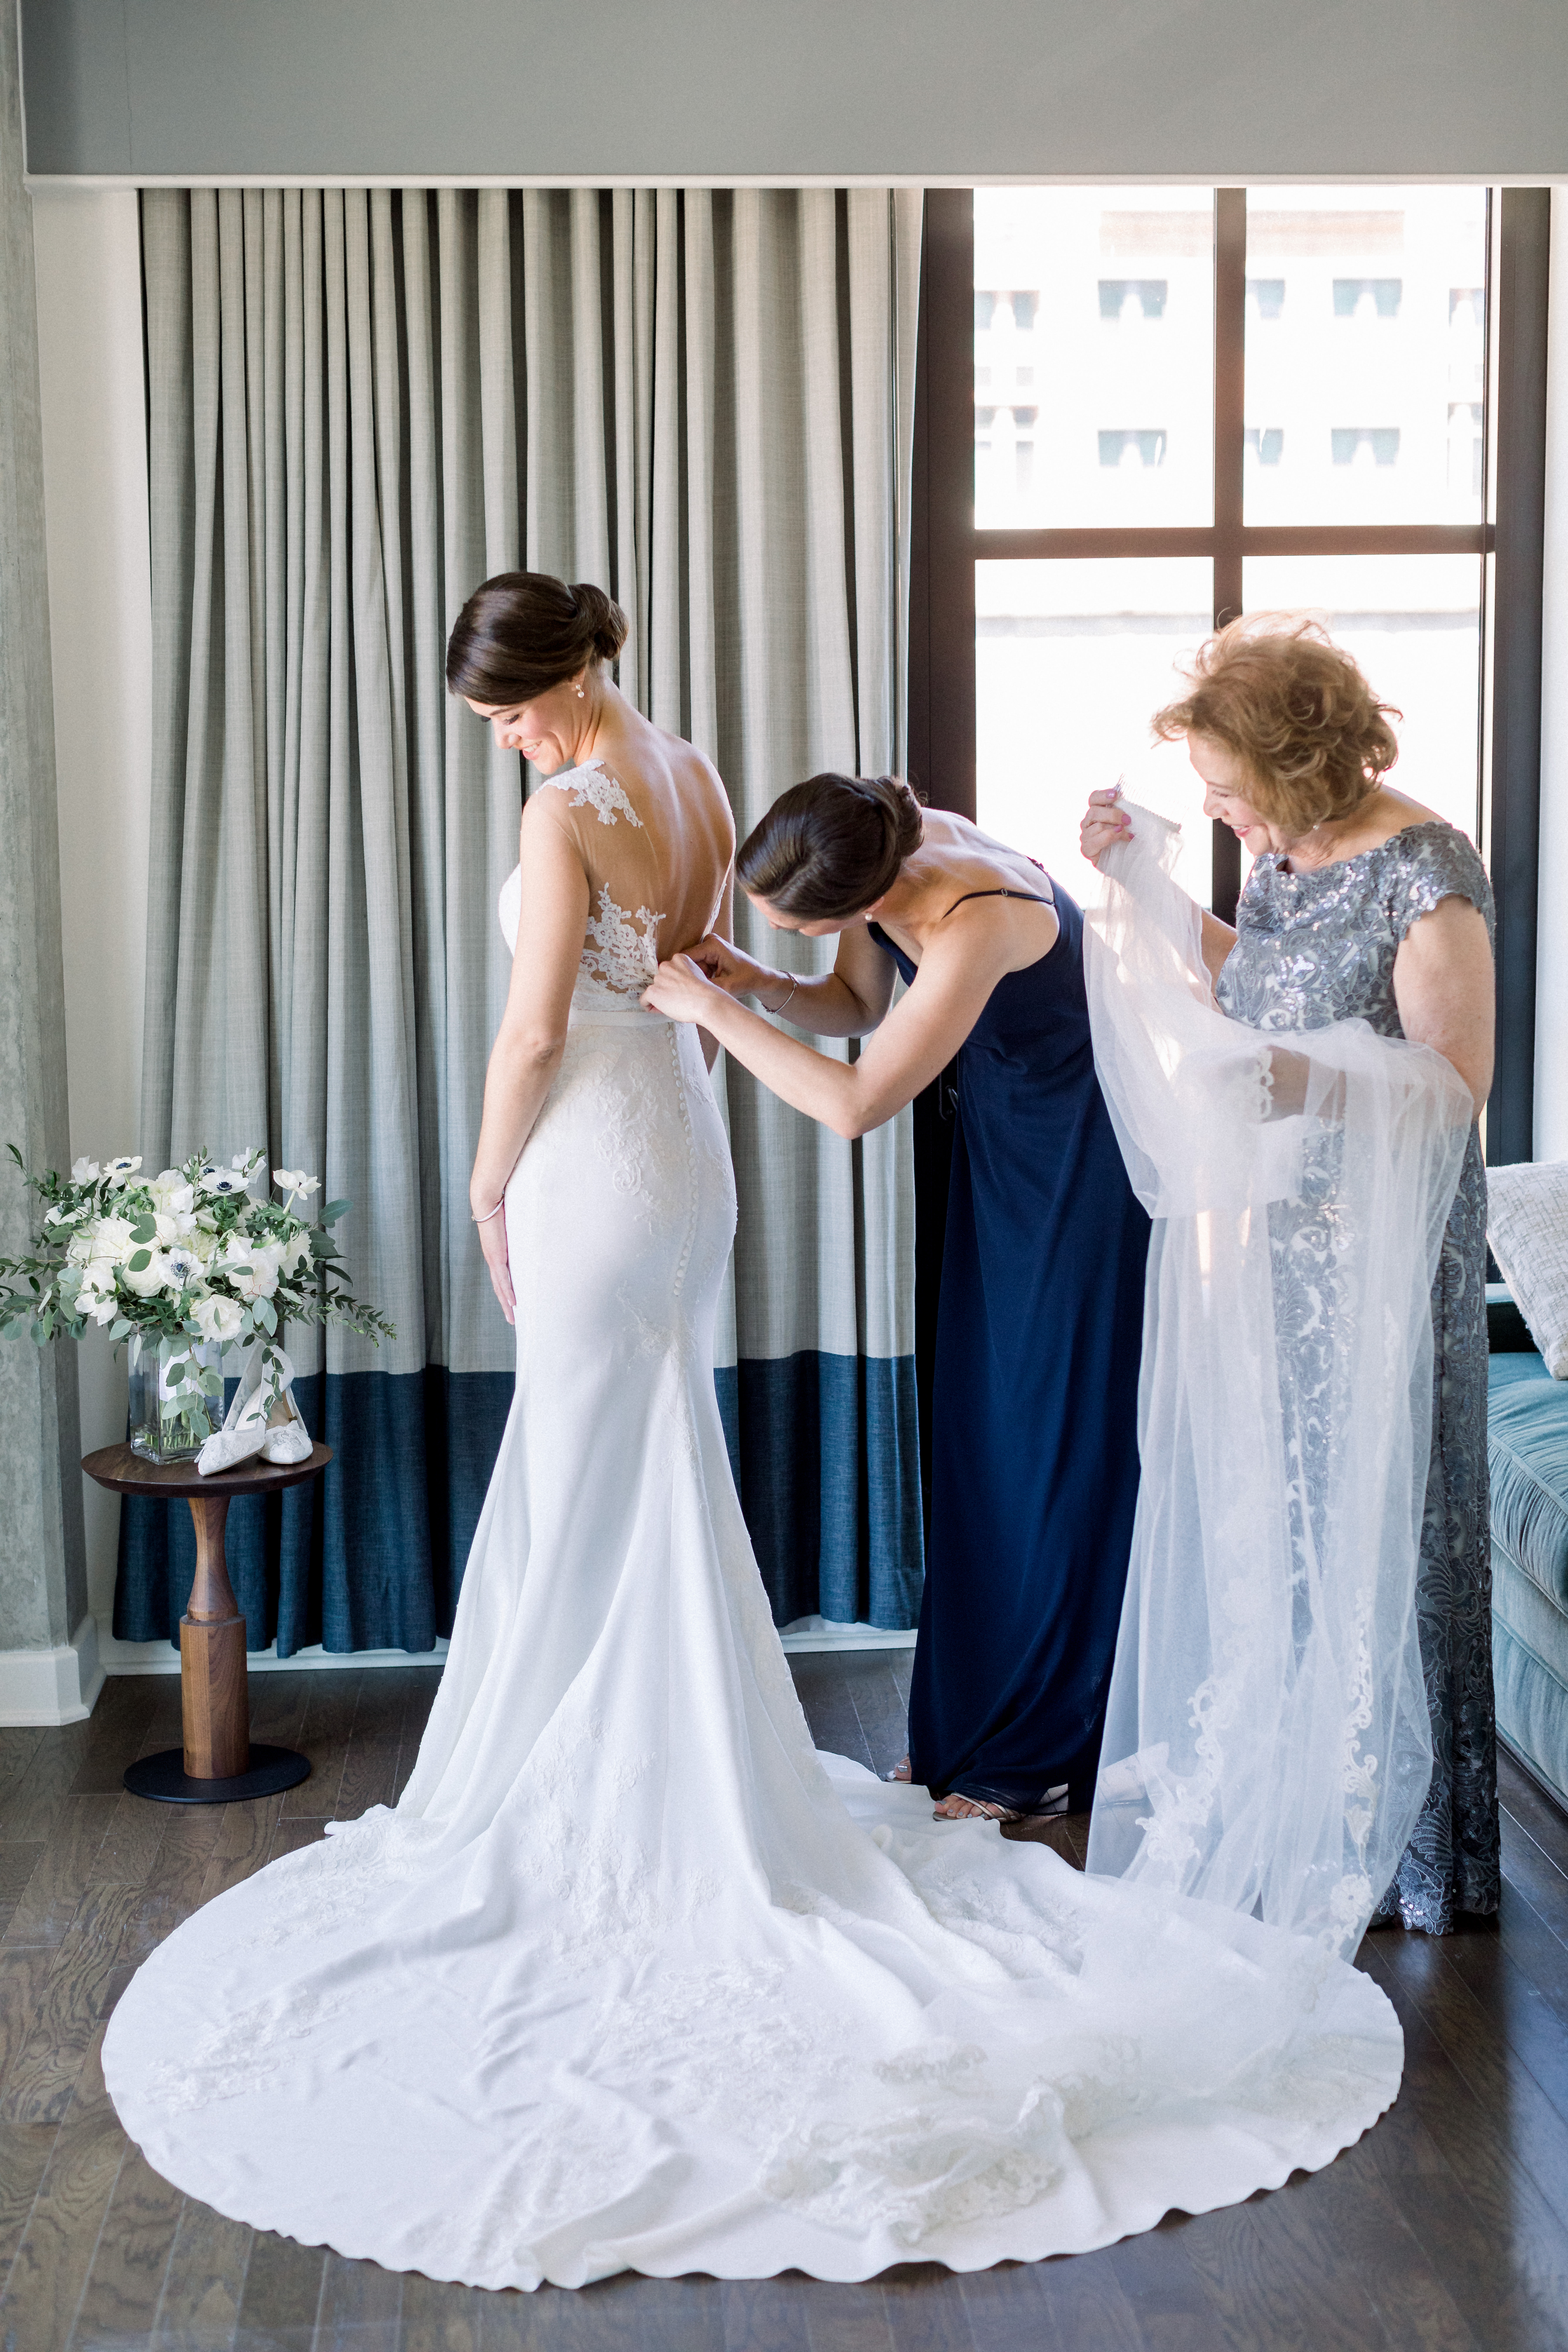 Maid/Matron of Honor helping bride get ready before wedding 